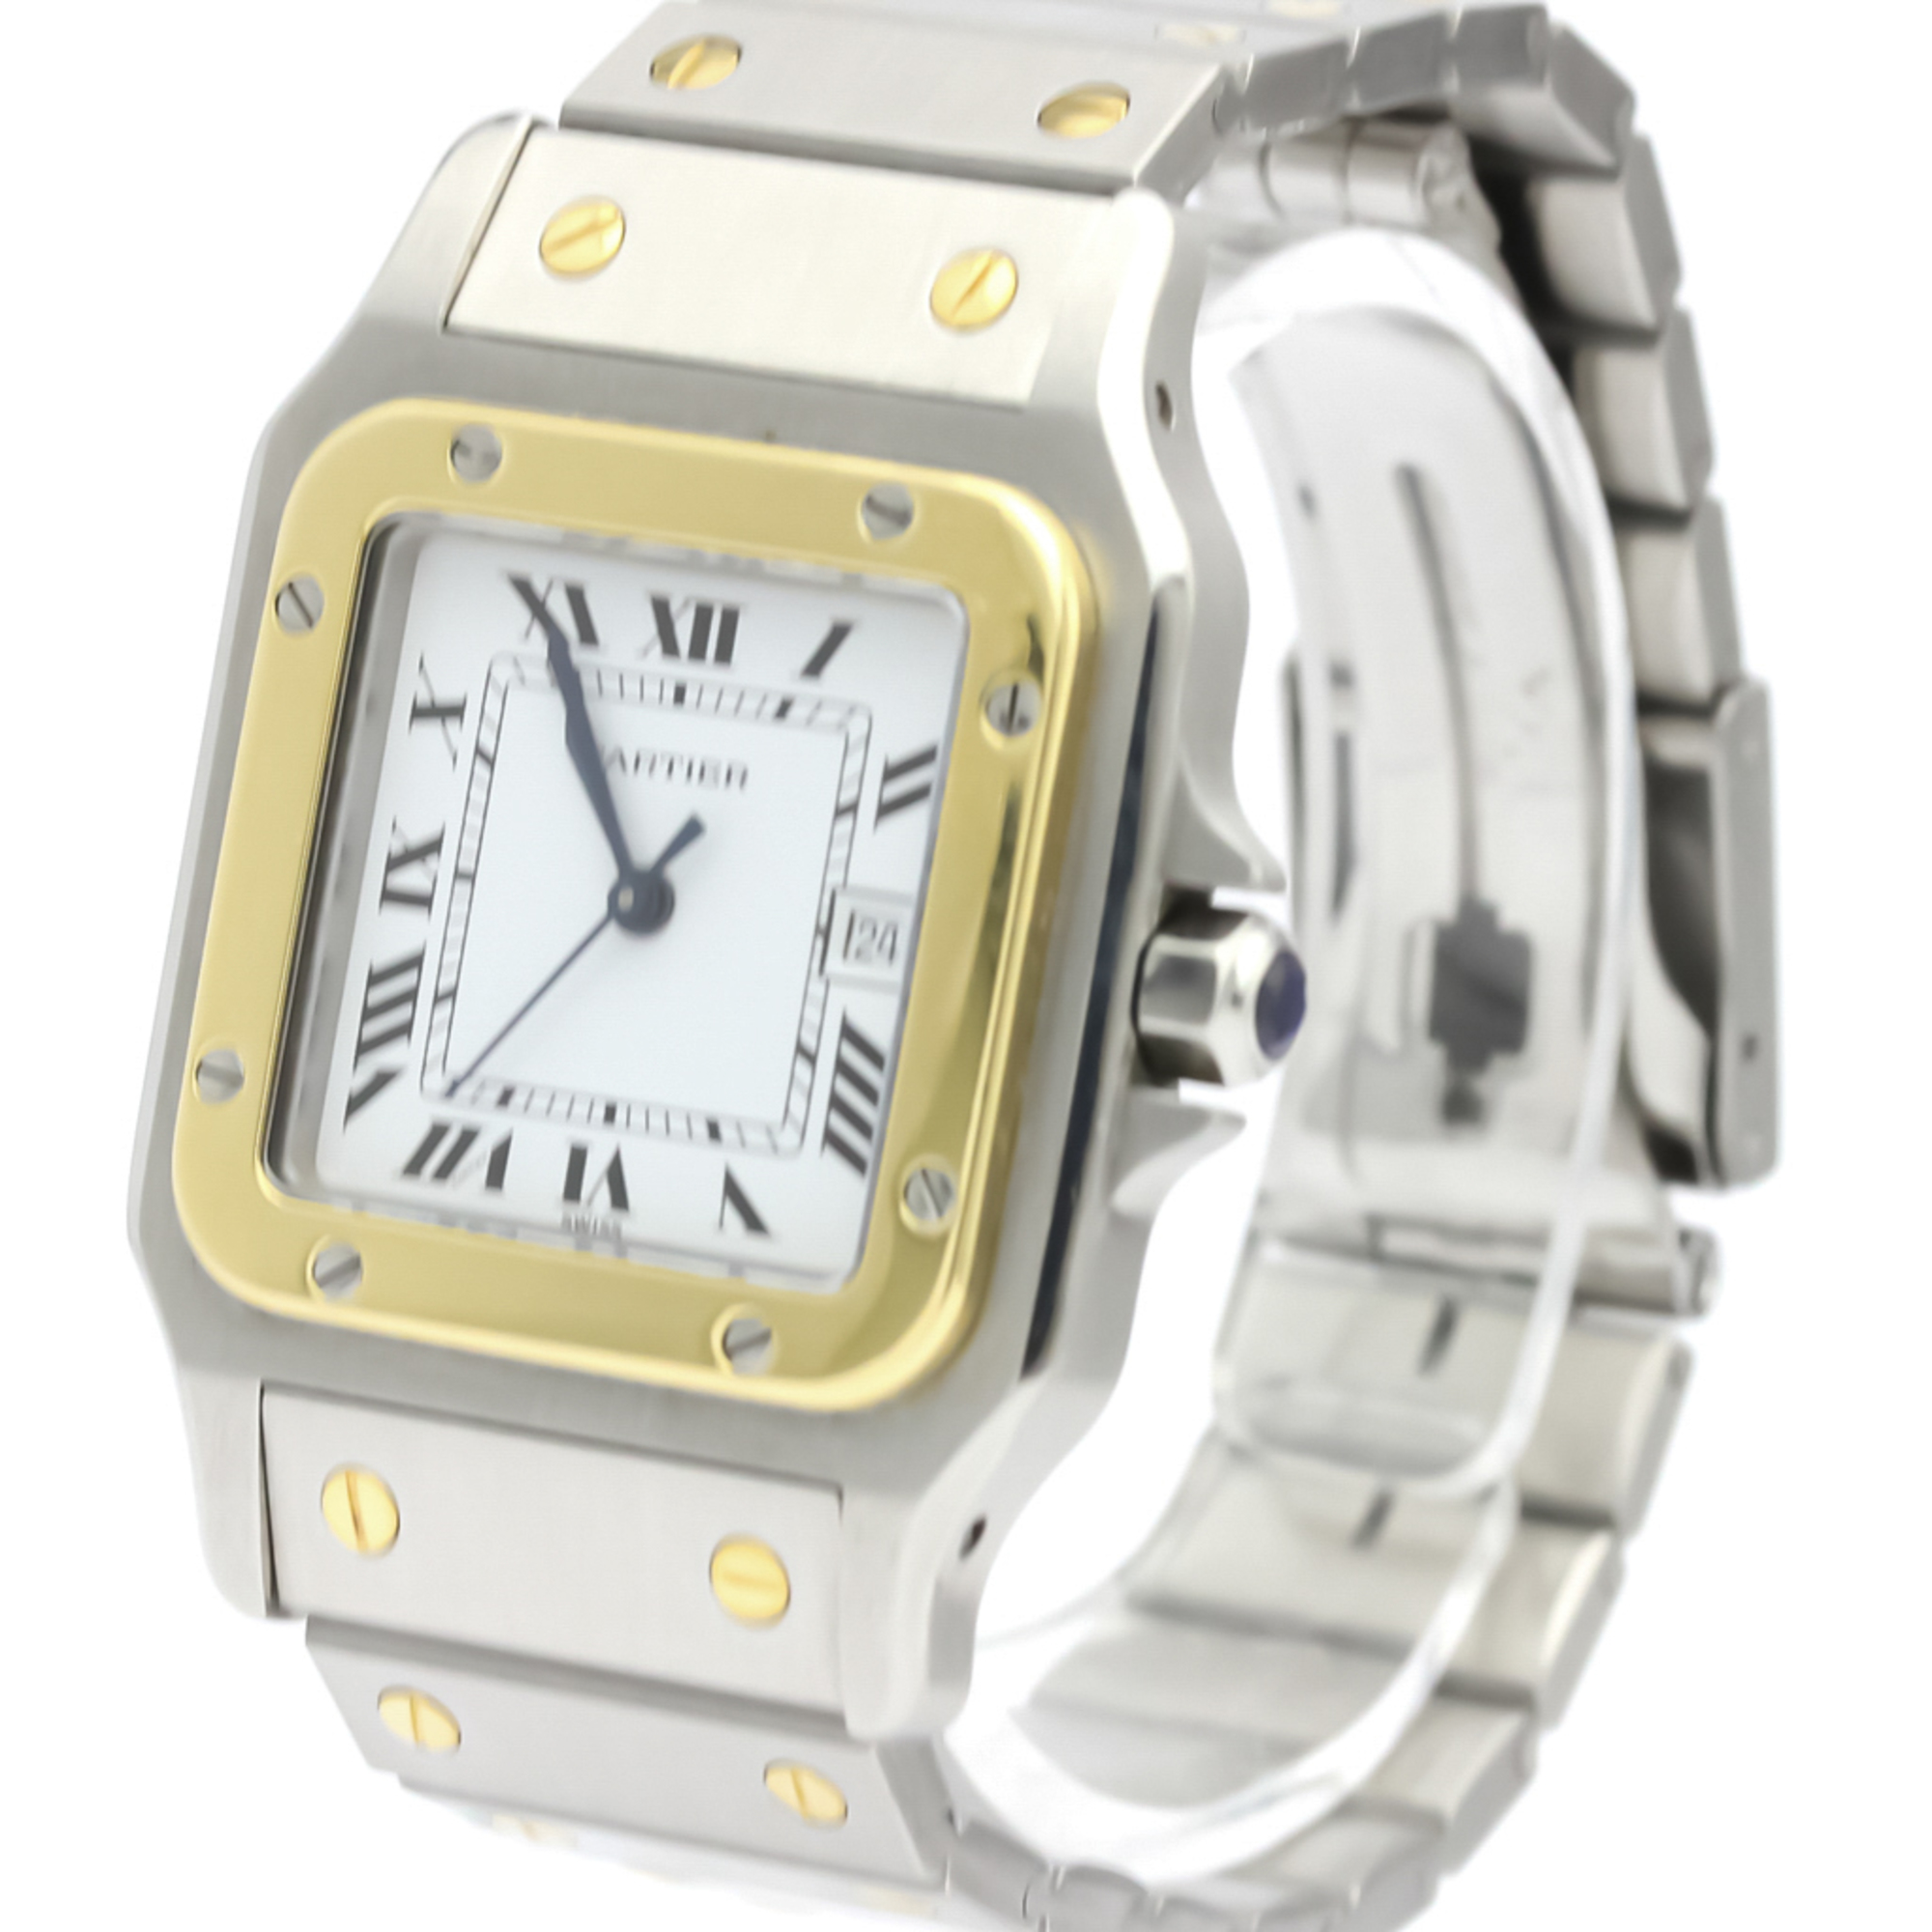 Cartier Santos Galbee Automatic Stainless Steel,Yellow Gold (18K) Men's Dress Watch -